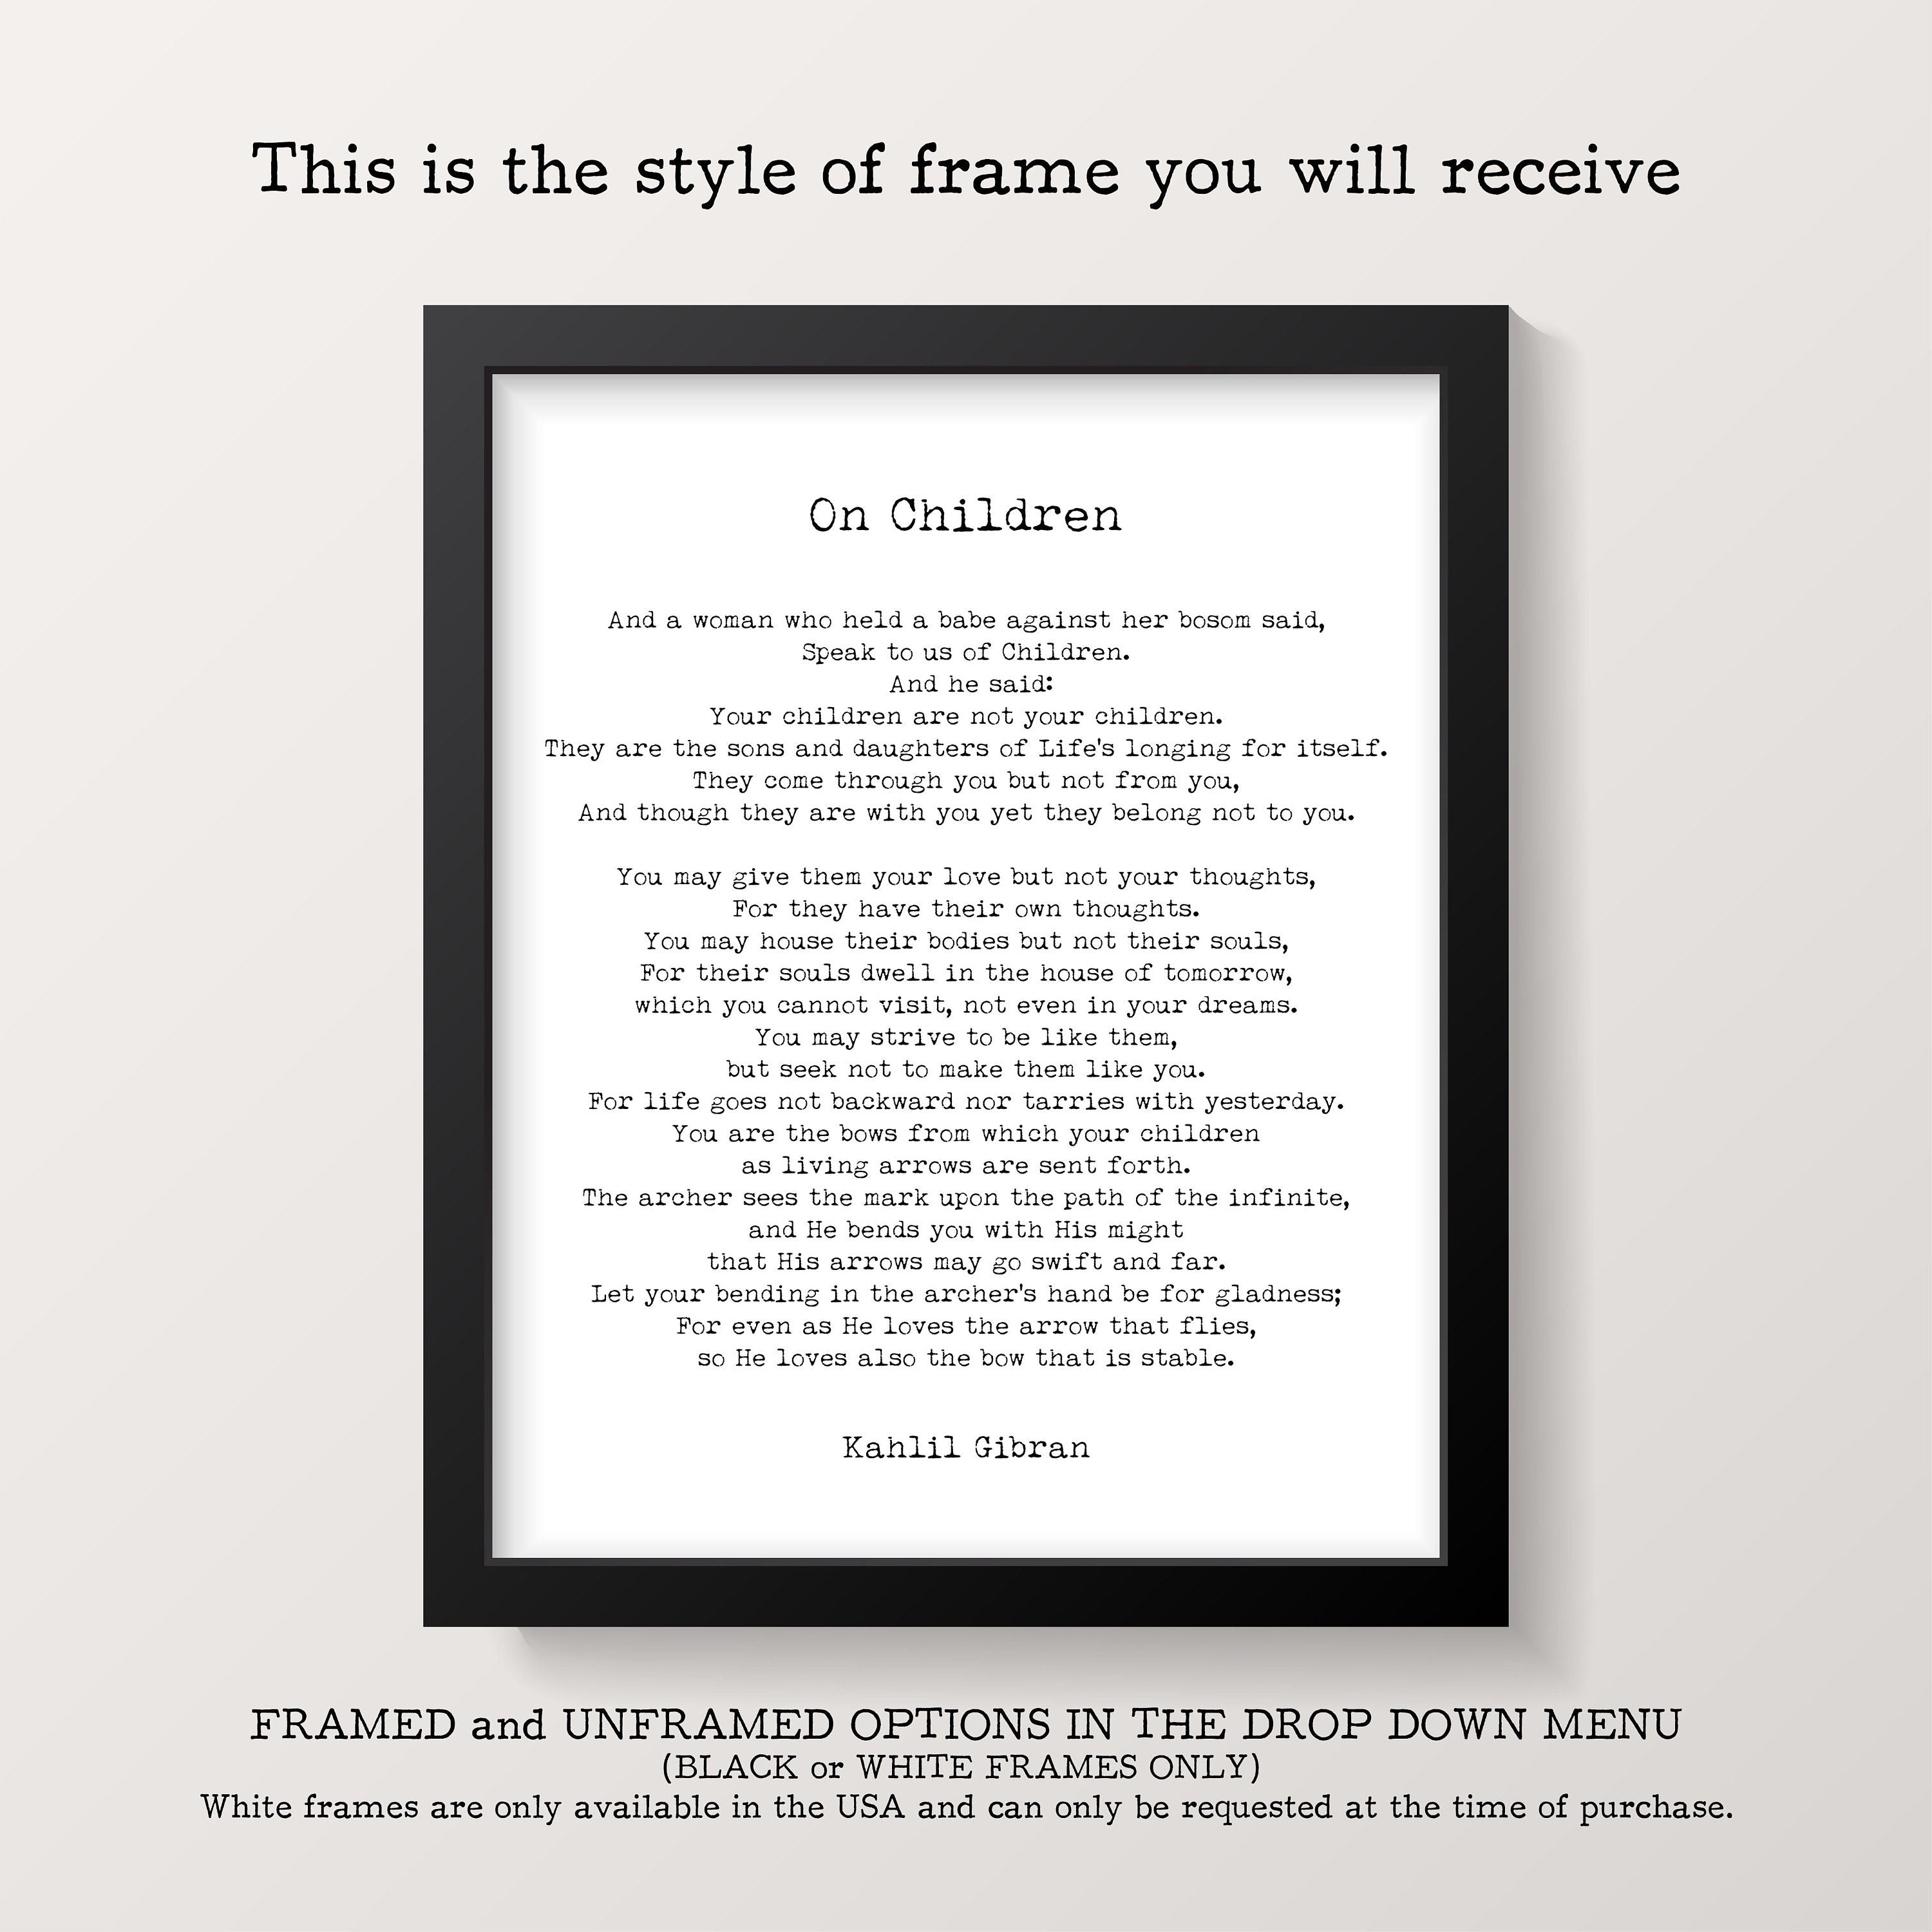 Walt Whitman Leaves of Grass Print, This Is What You Shall Do Inspirational Poem in Vintage or Black & White for Home Wall Decor